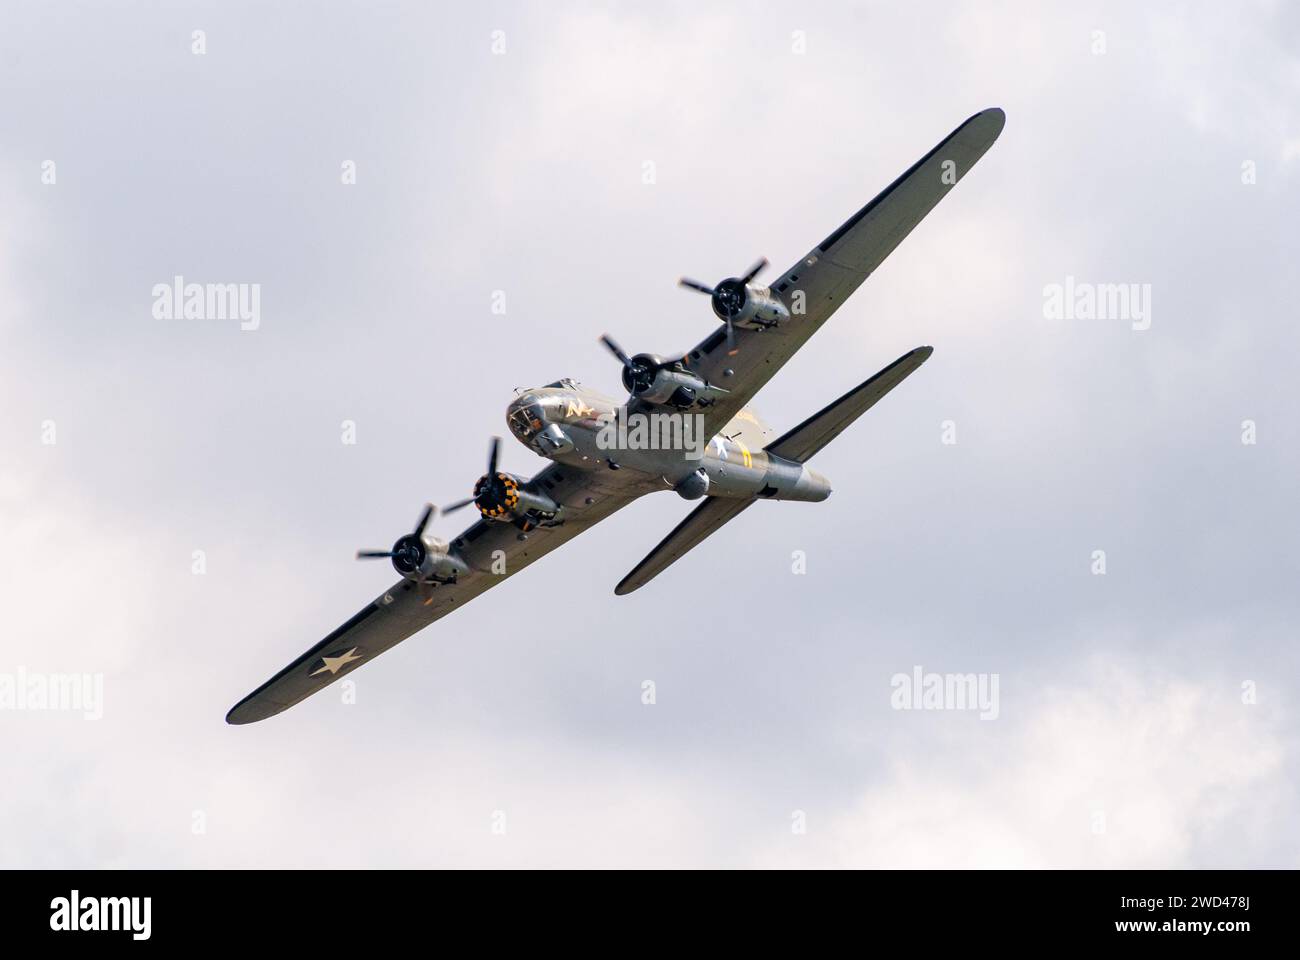 Boeing B-17G Flying Fortress '124485' WW2 Bomber plane representing the famous 'Memphis Belle' flying in the sky Stock Photo